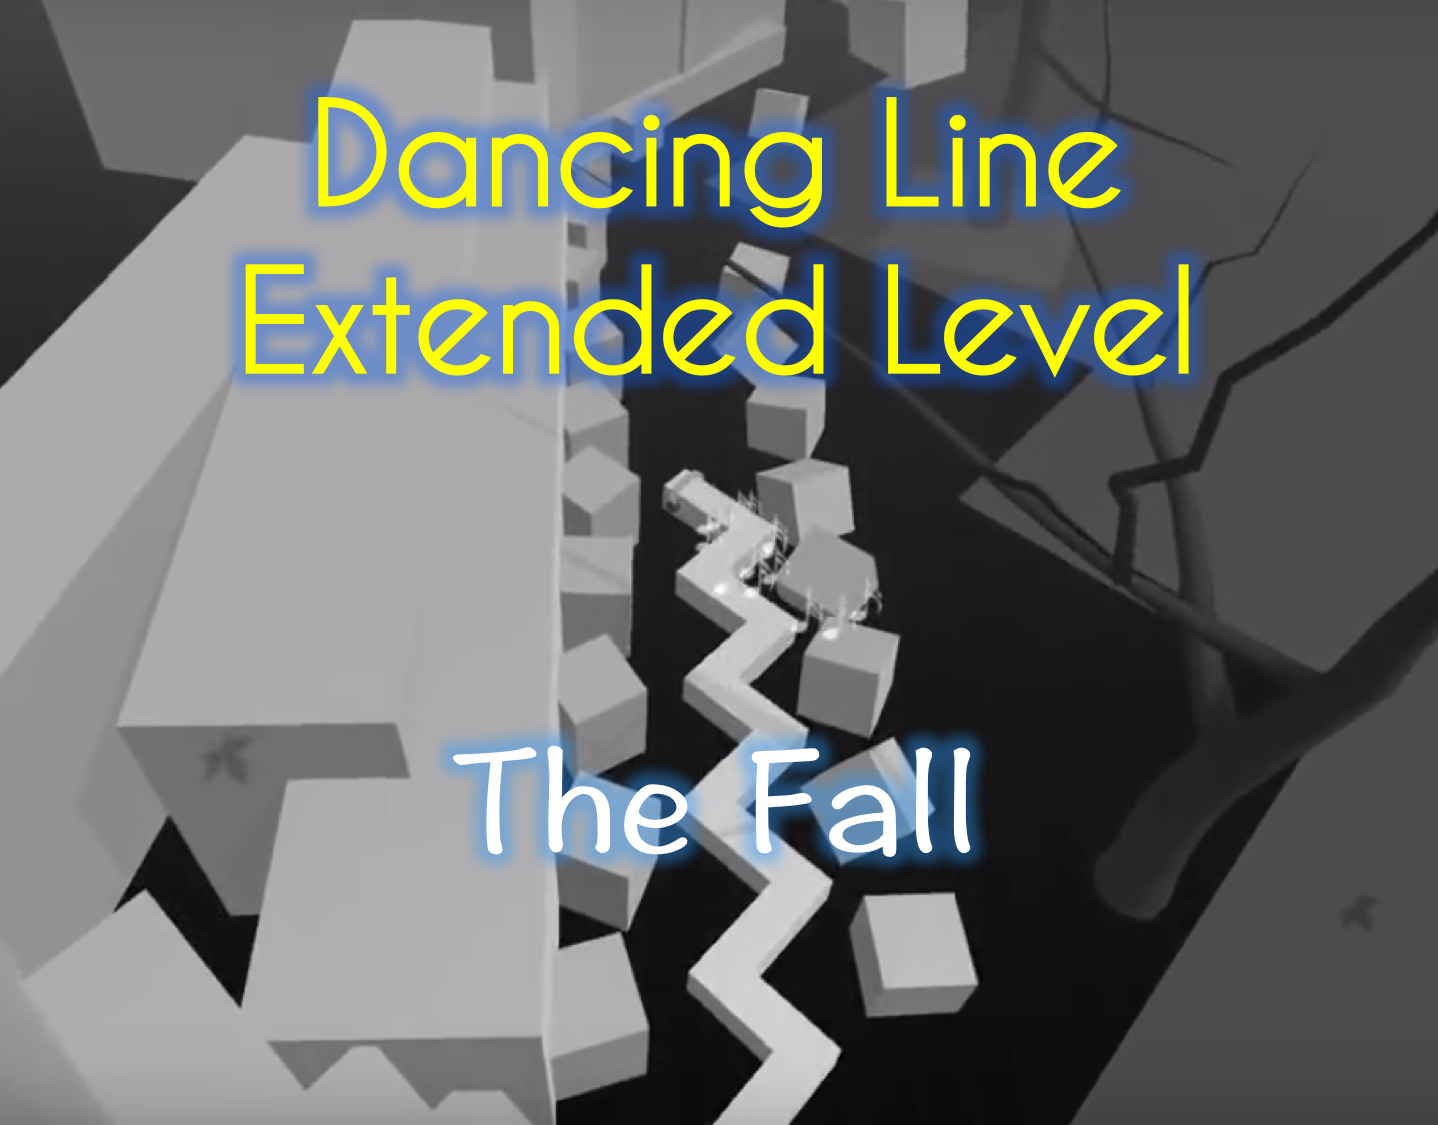 dancing line fanmade levels